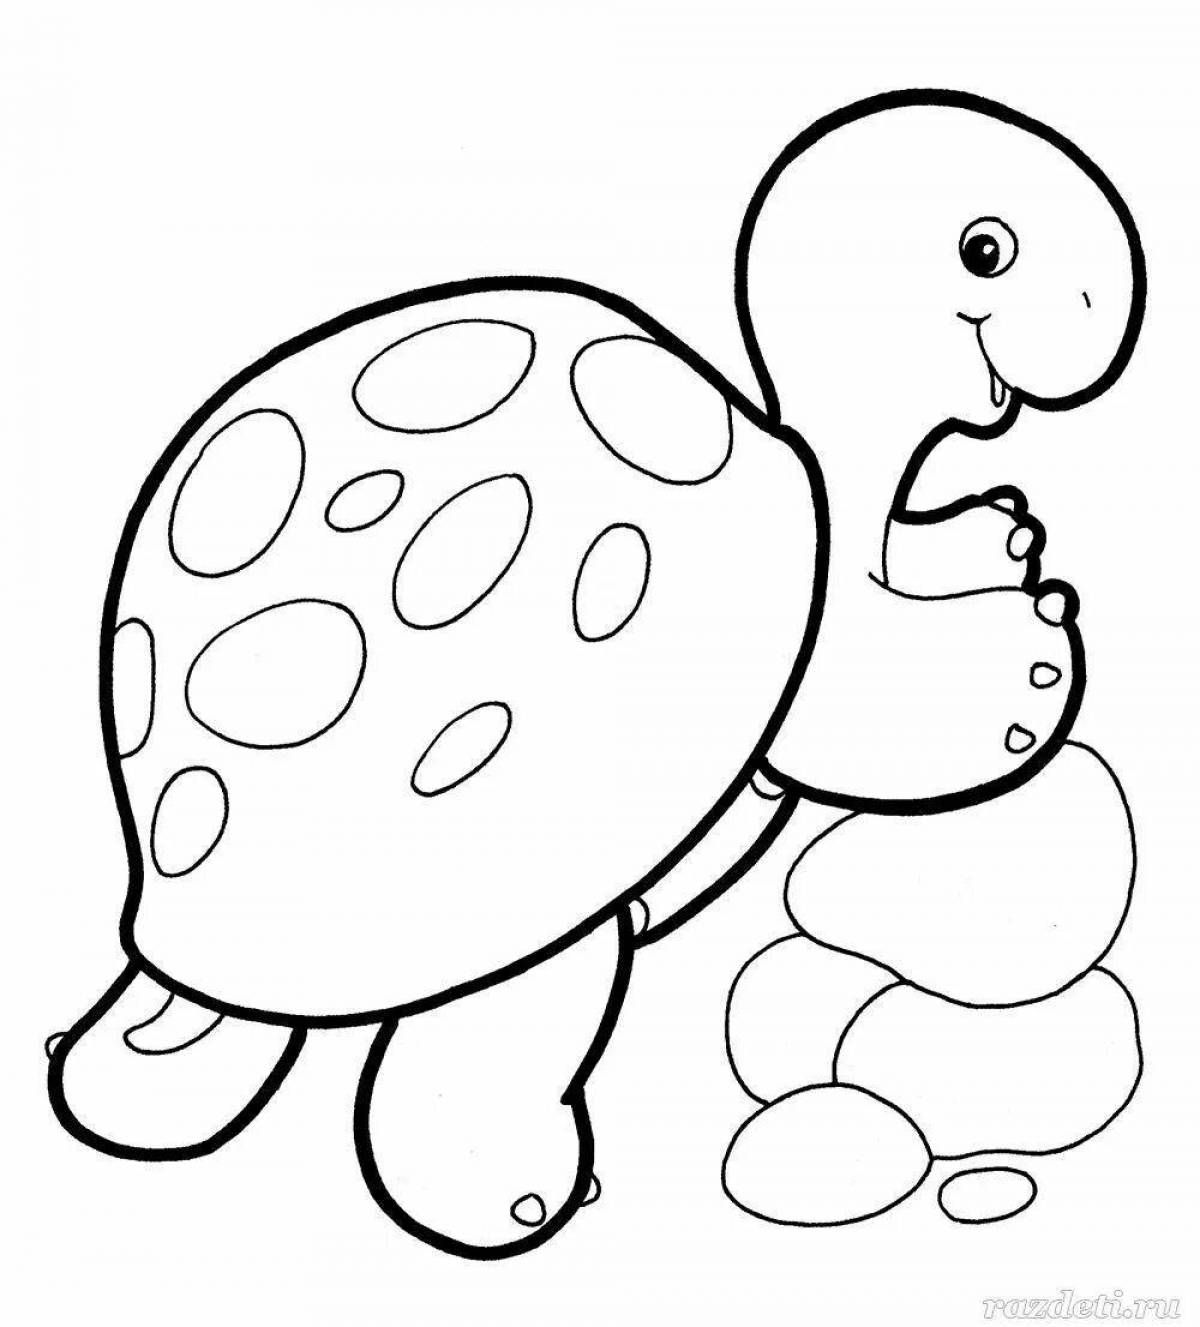 Great turtle coloring book for kids